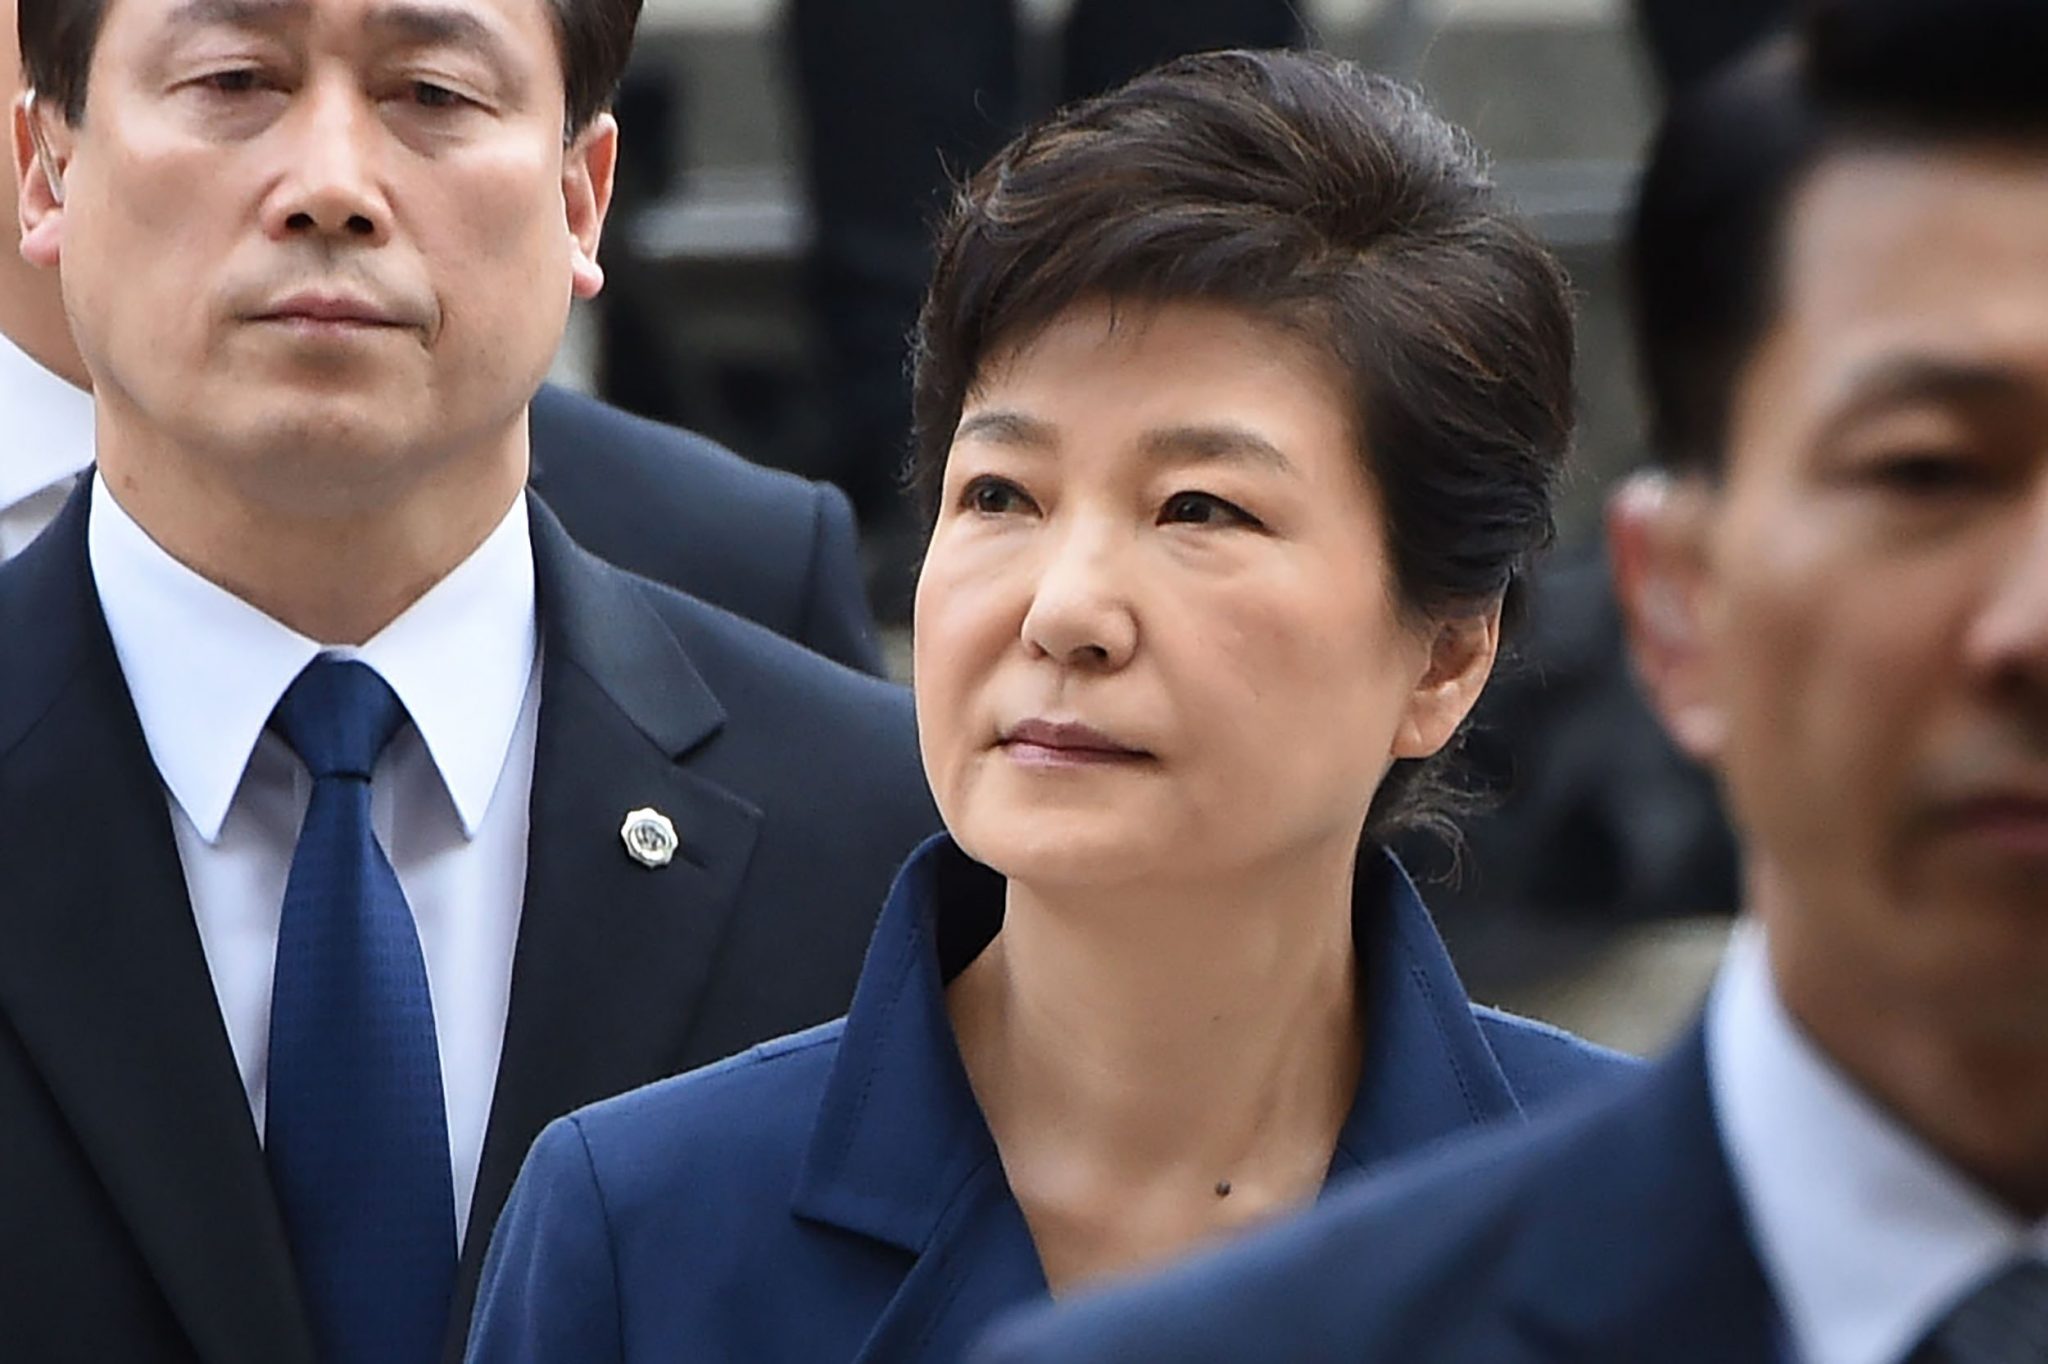 South Korea's ousted president Park Geun-Hye (C) arrives for a hearing to decide whether she should be arrested over the corruption and abuse of power scandal that brought her down, at a court in Seoul on March 30, 2017. Her formal detention and transfer to custody would be a key step in the disgrace of South Korea's first woman president, who secured the largest vote share of any candidate in the democratic era when she was elected in 2012. Park had her removal from office confirmed by the country's top court earlier this month, ending her executive immunity, and her prosecution has been a key demand of the millions of people who took to the streets to protest against her. / AFP PHOTO / YONHAP / YONHAP / REPUBLIC OF KOREA OUT NO ARCHIVES RESTRICTED TO SUBSCRIPTION USE